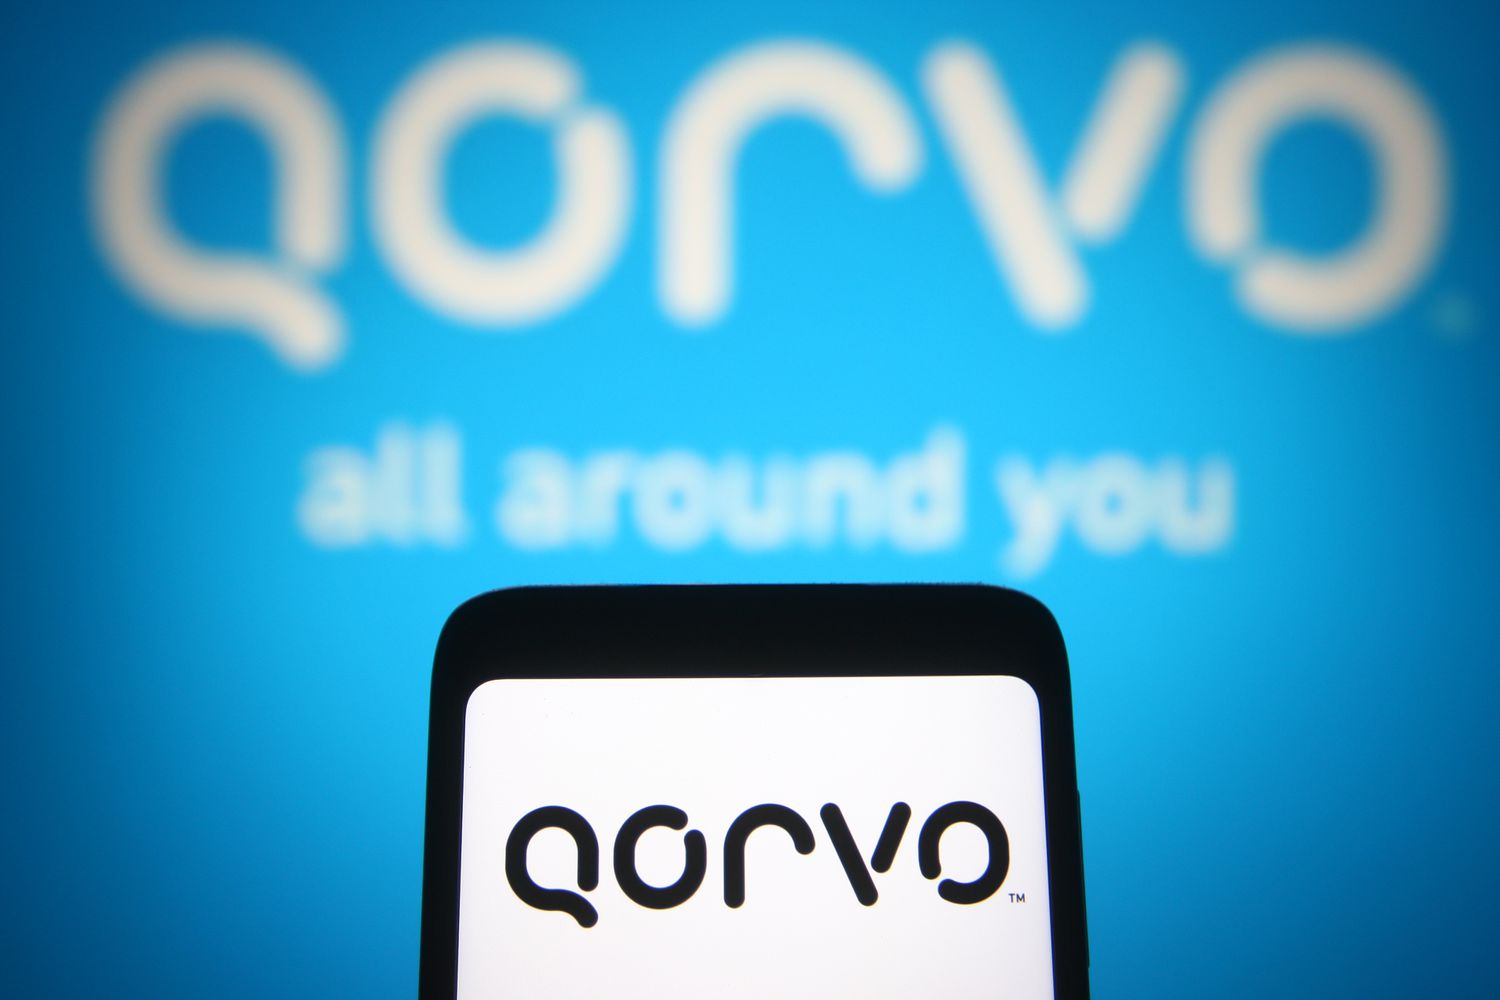 Slowing Mobile Phone Sales Take A Bite Out Of Apple Supplier Qorvo’s Guidance [Video]